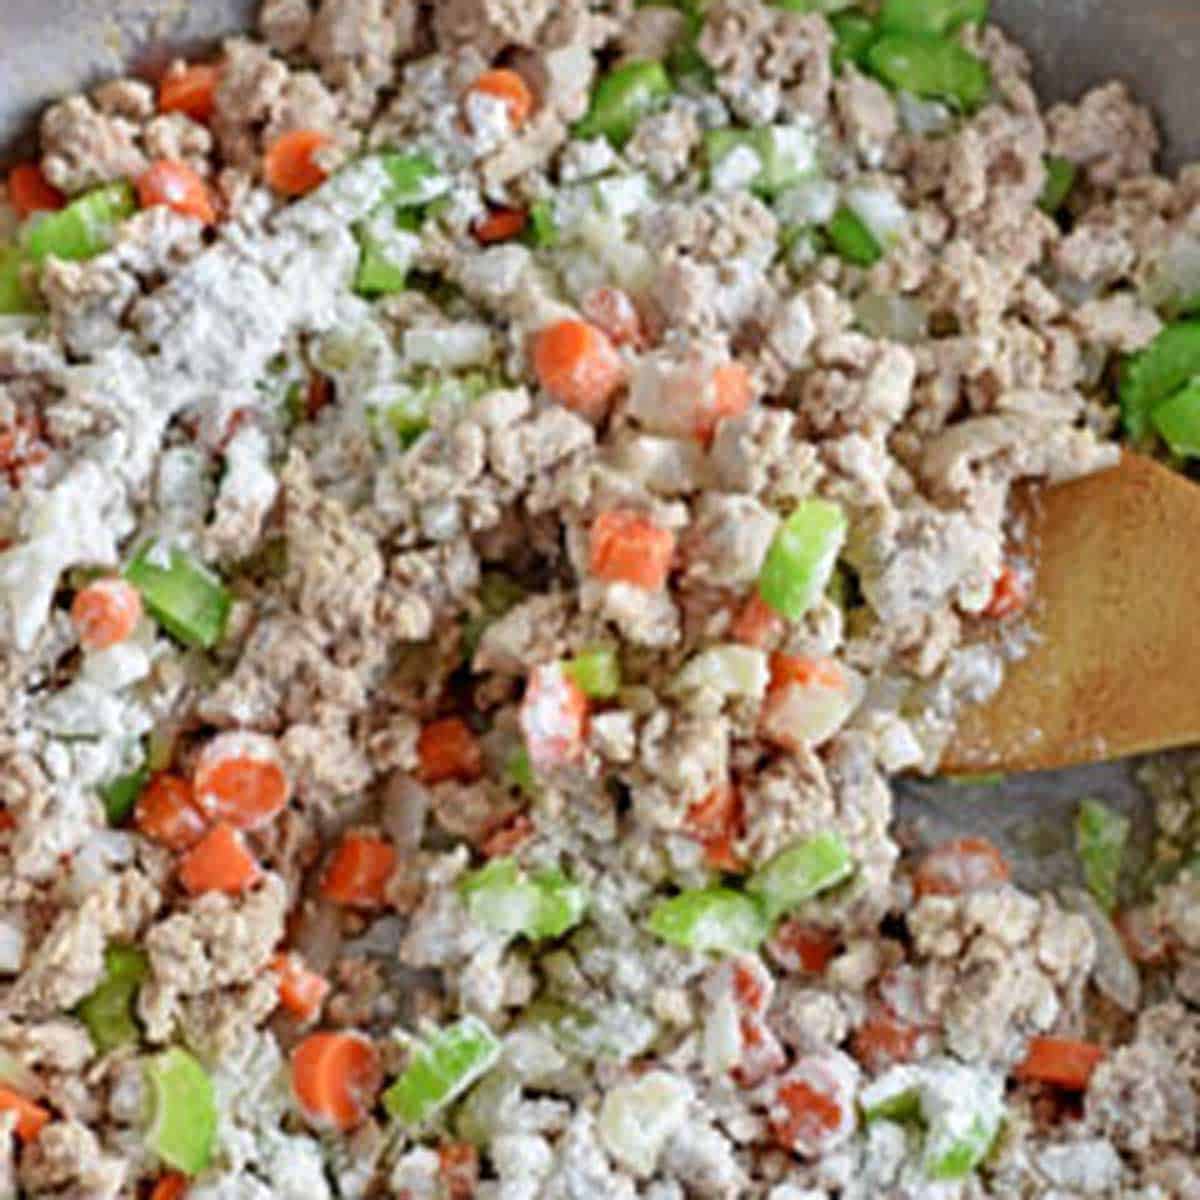 A wooden spoon stirring flour into a large skillet filled with cooked ground turkey, diced onions, celery, and carrots.